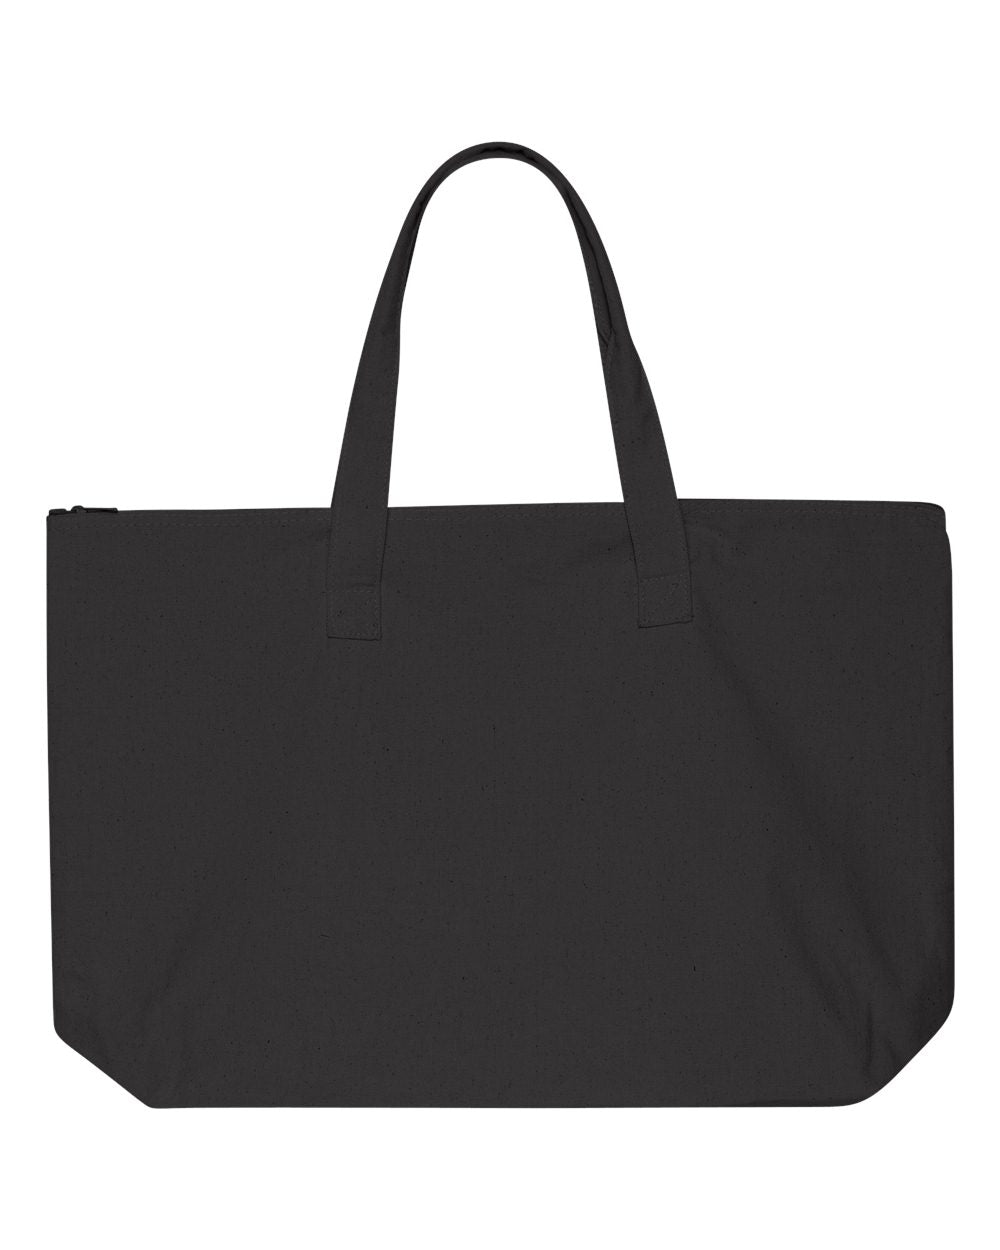 (12) Canvas Zippered Tote Bag-Full Color Print